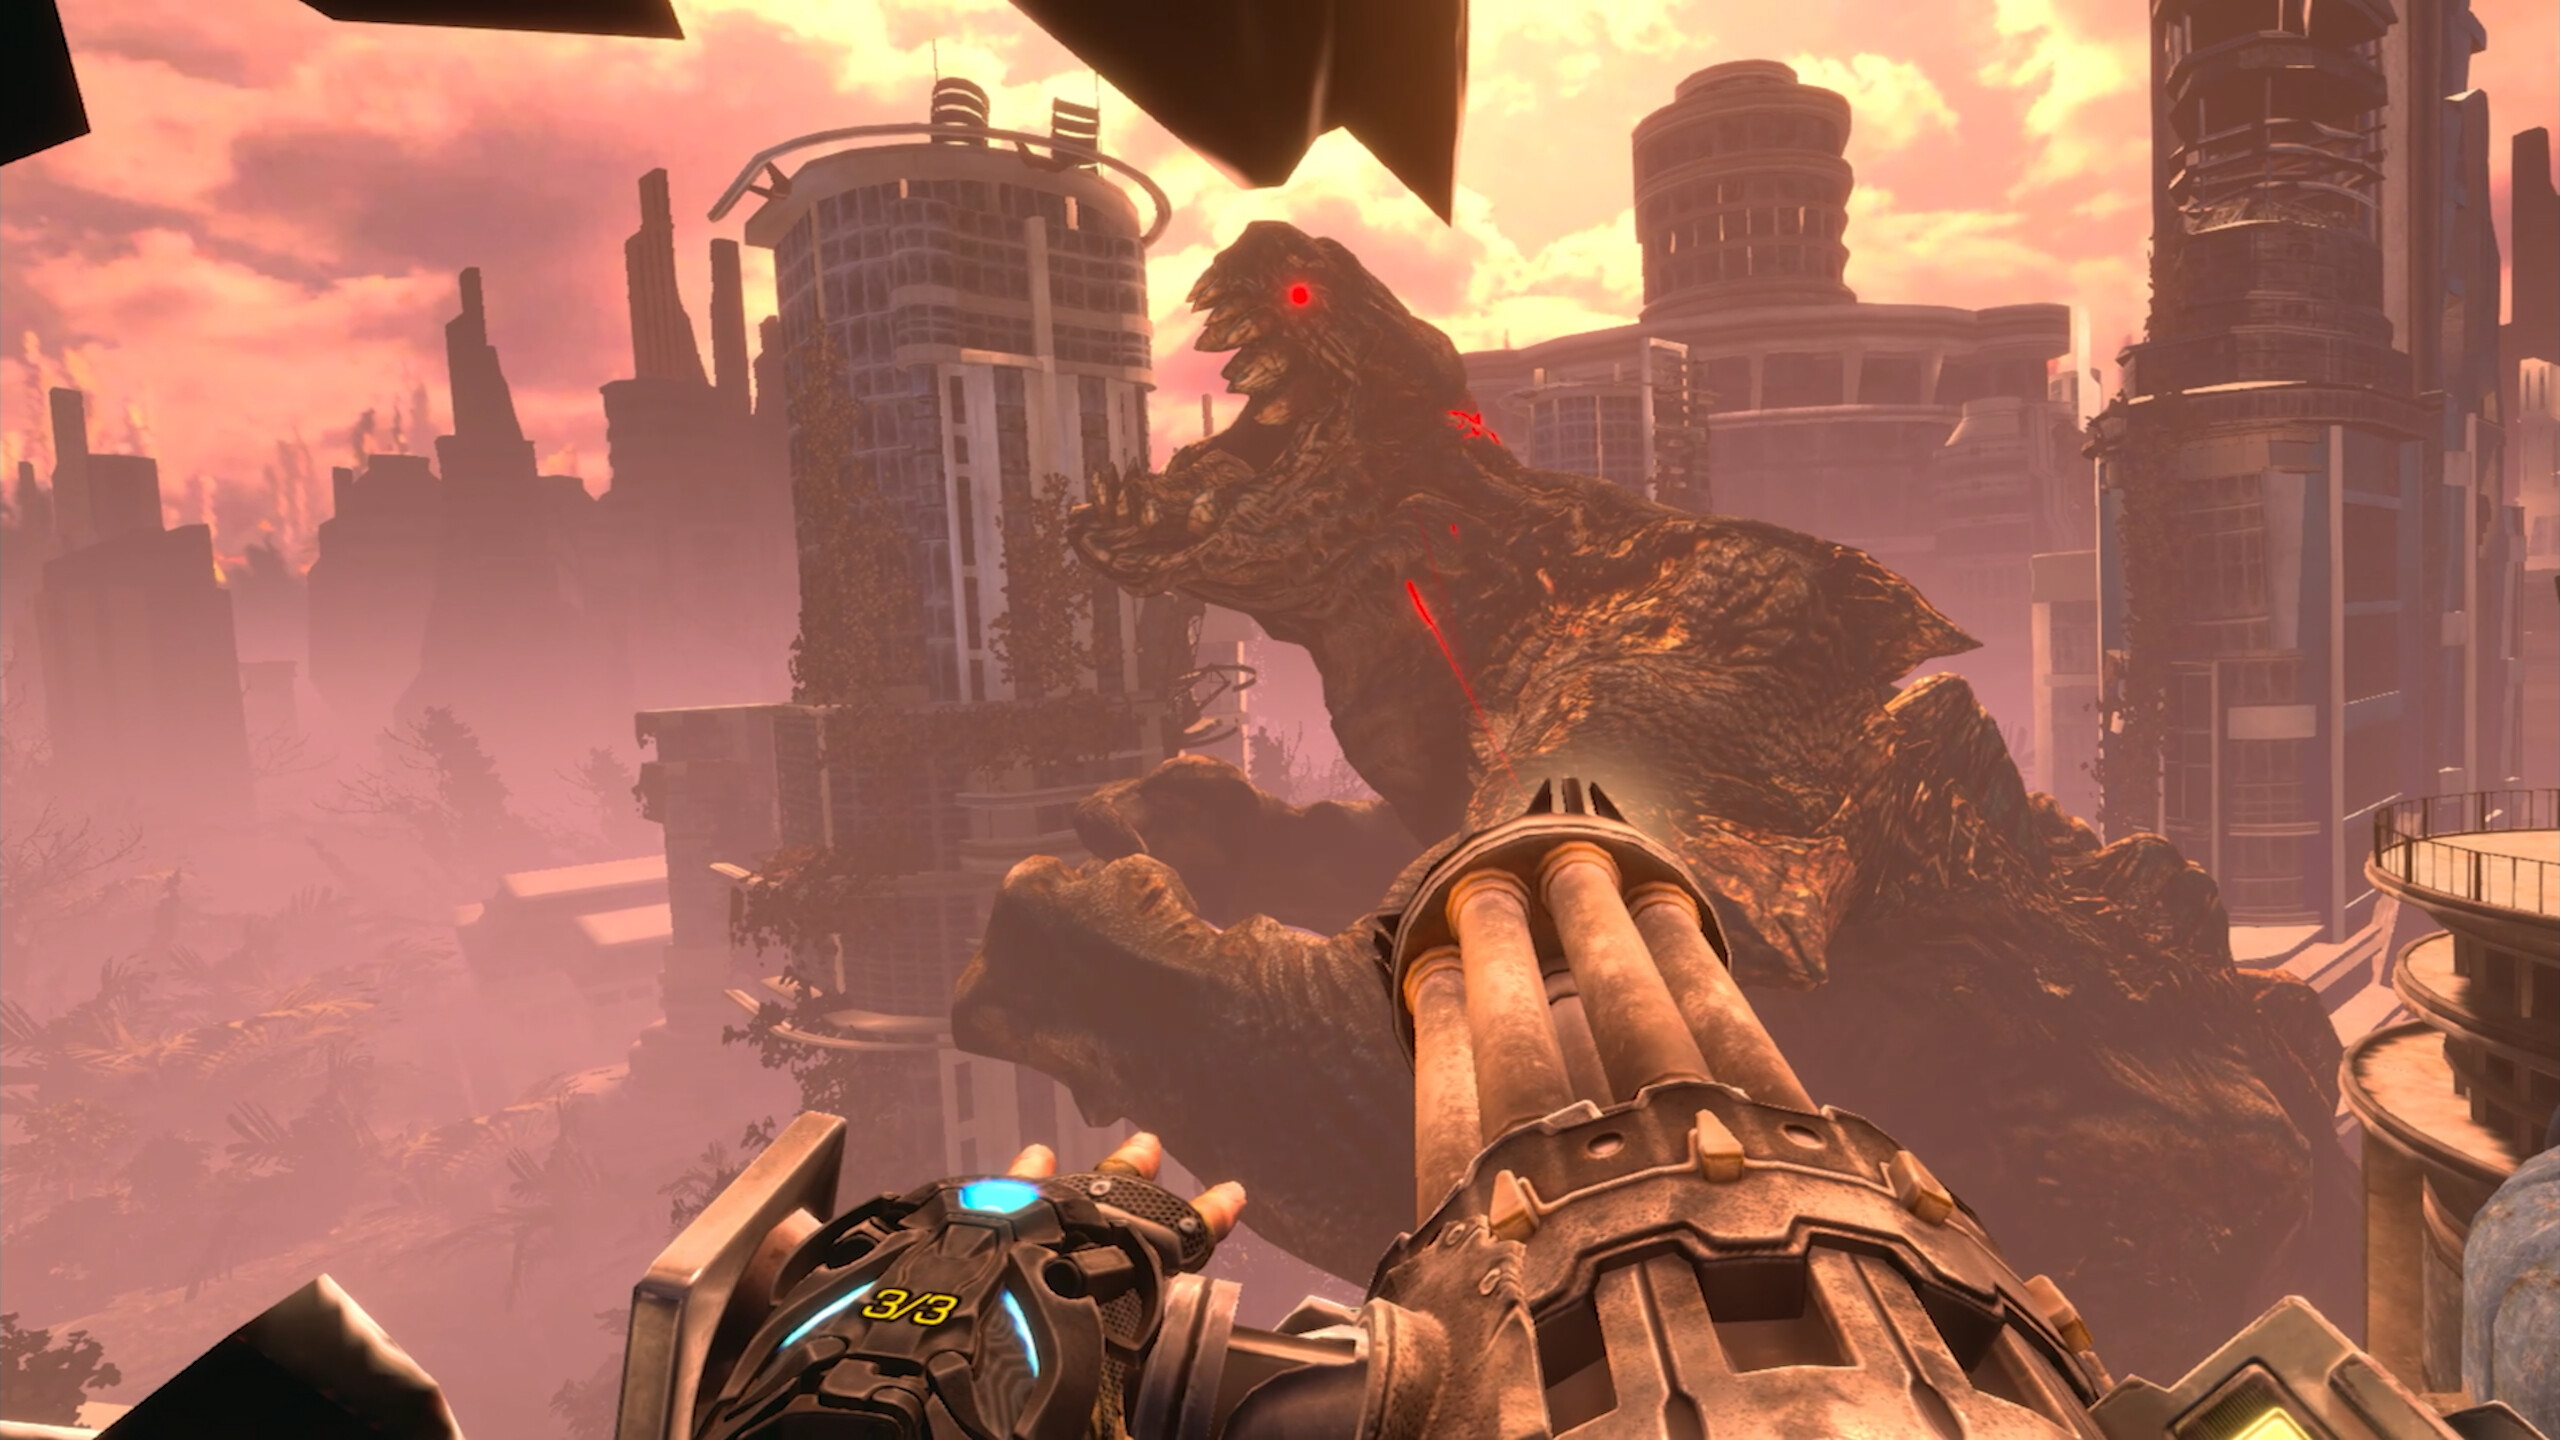 A scene from Bulletstorm VR. A huge dinosaur-like creature bursts through the planet’s surface in front of the player, who is brandishing a multi-rail gatling gun